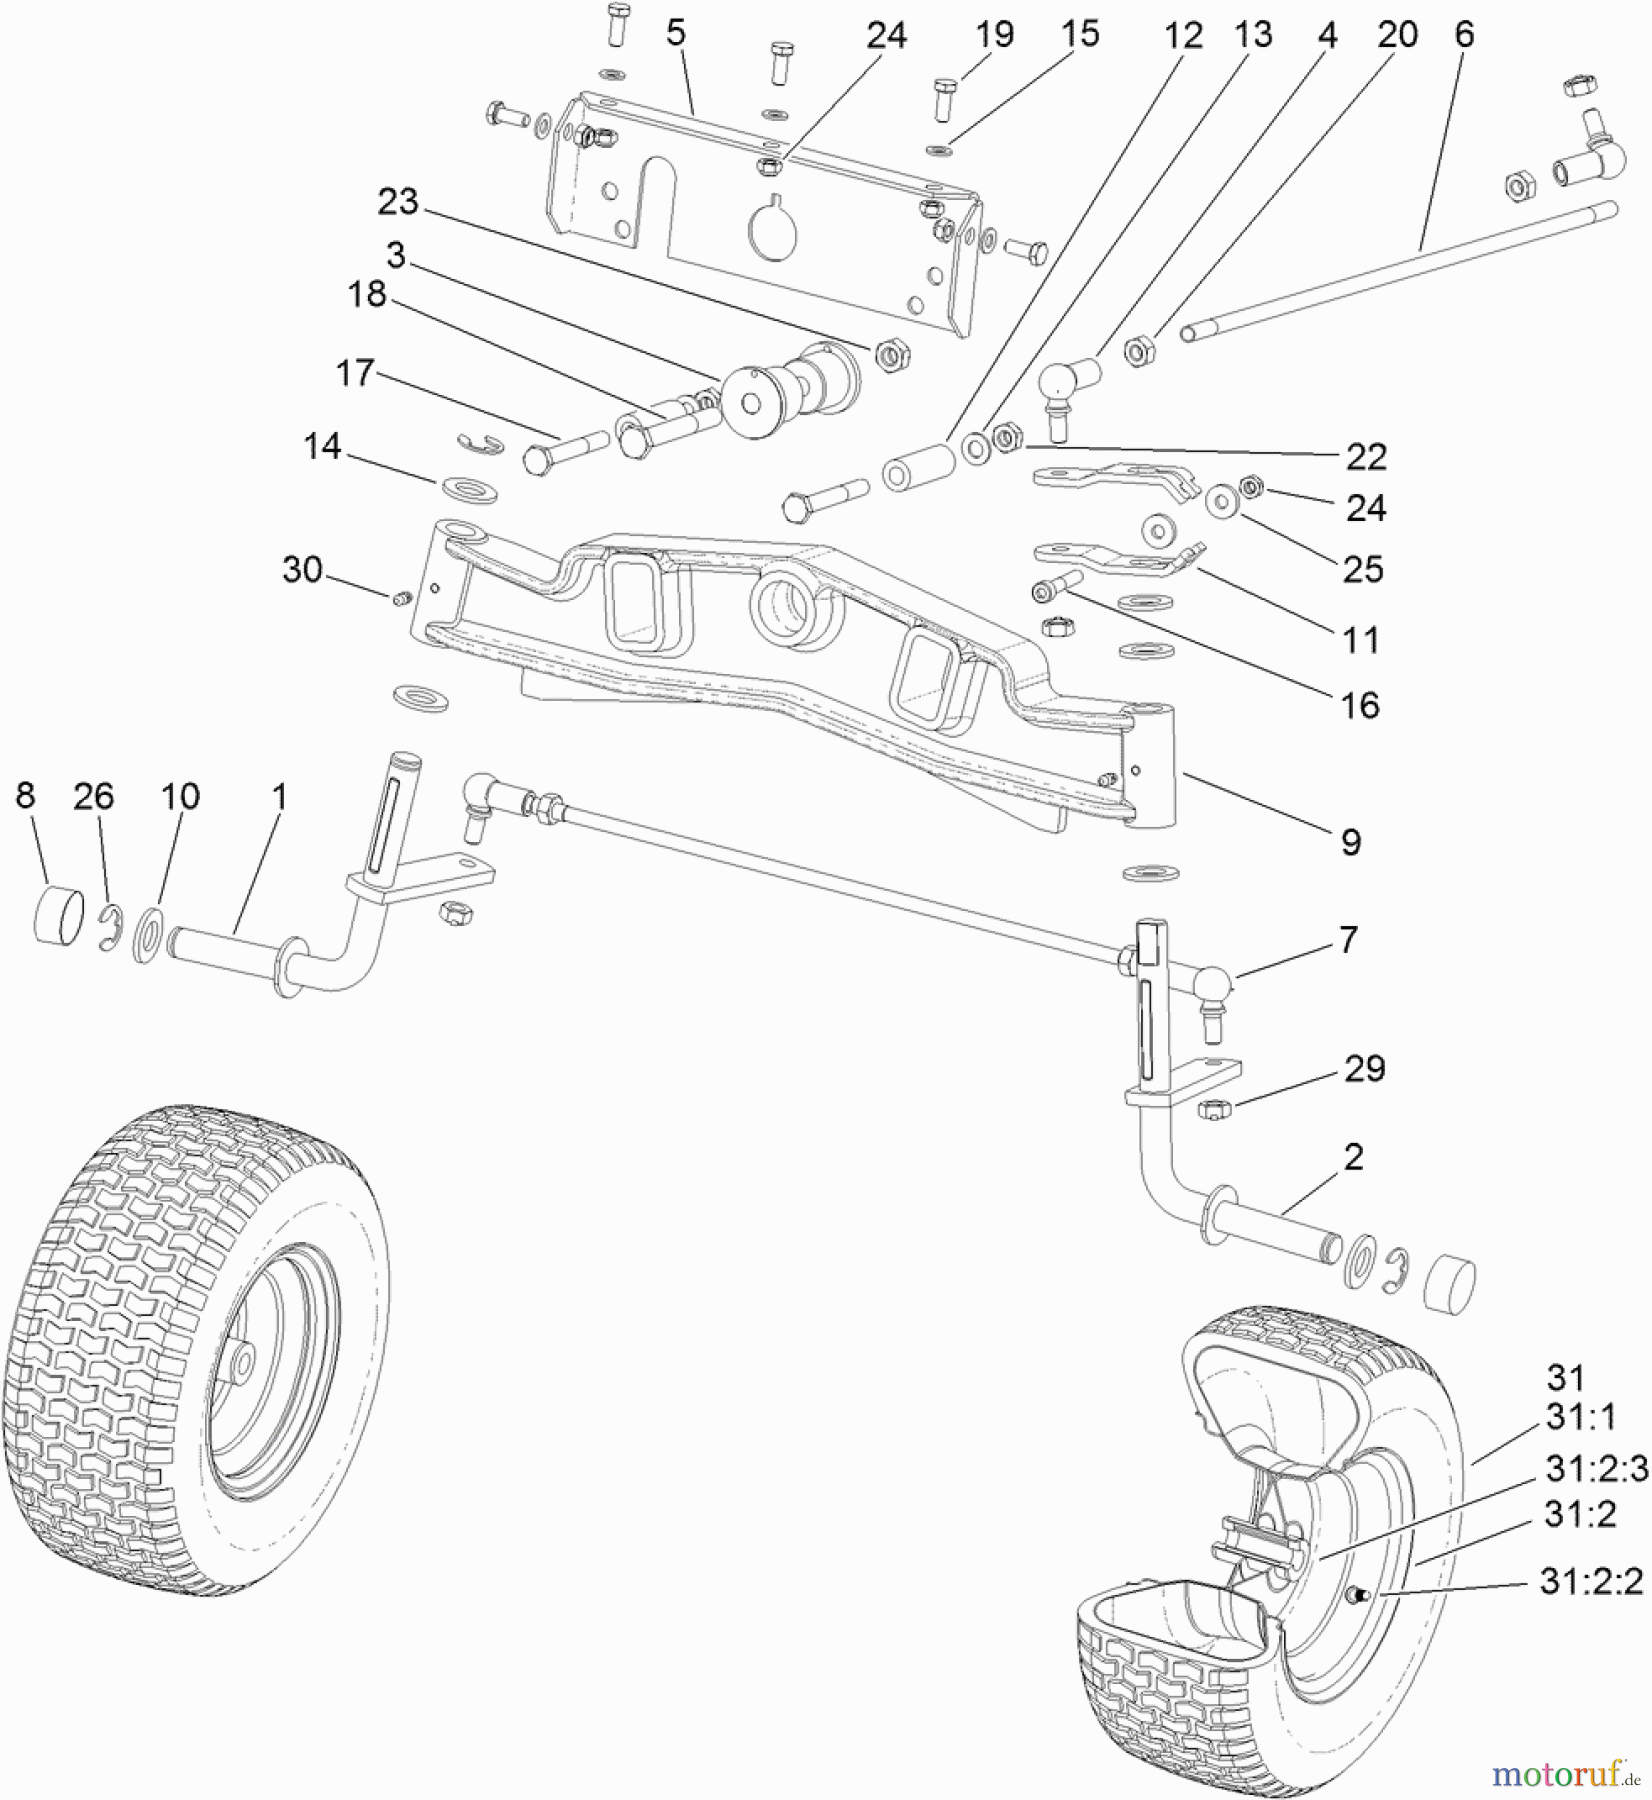  Toro Neu Mowers, Lawn & Garden Tractor Seite 1 74585 (DH 210) - Toro DH 210 Lawn Tractor, 2012 (SN 312000001-312999999) FRONT AXLE ASSEMBLY